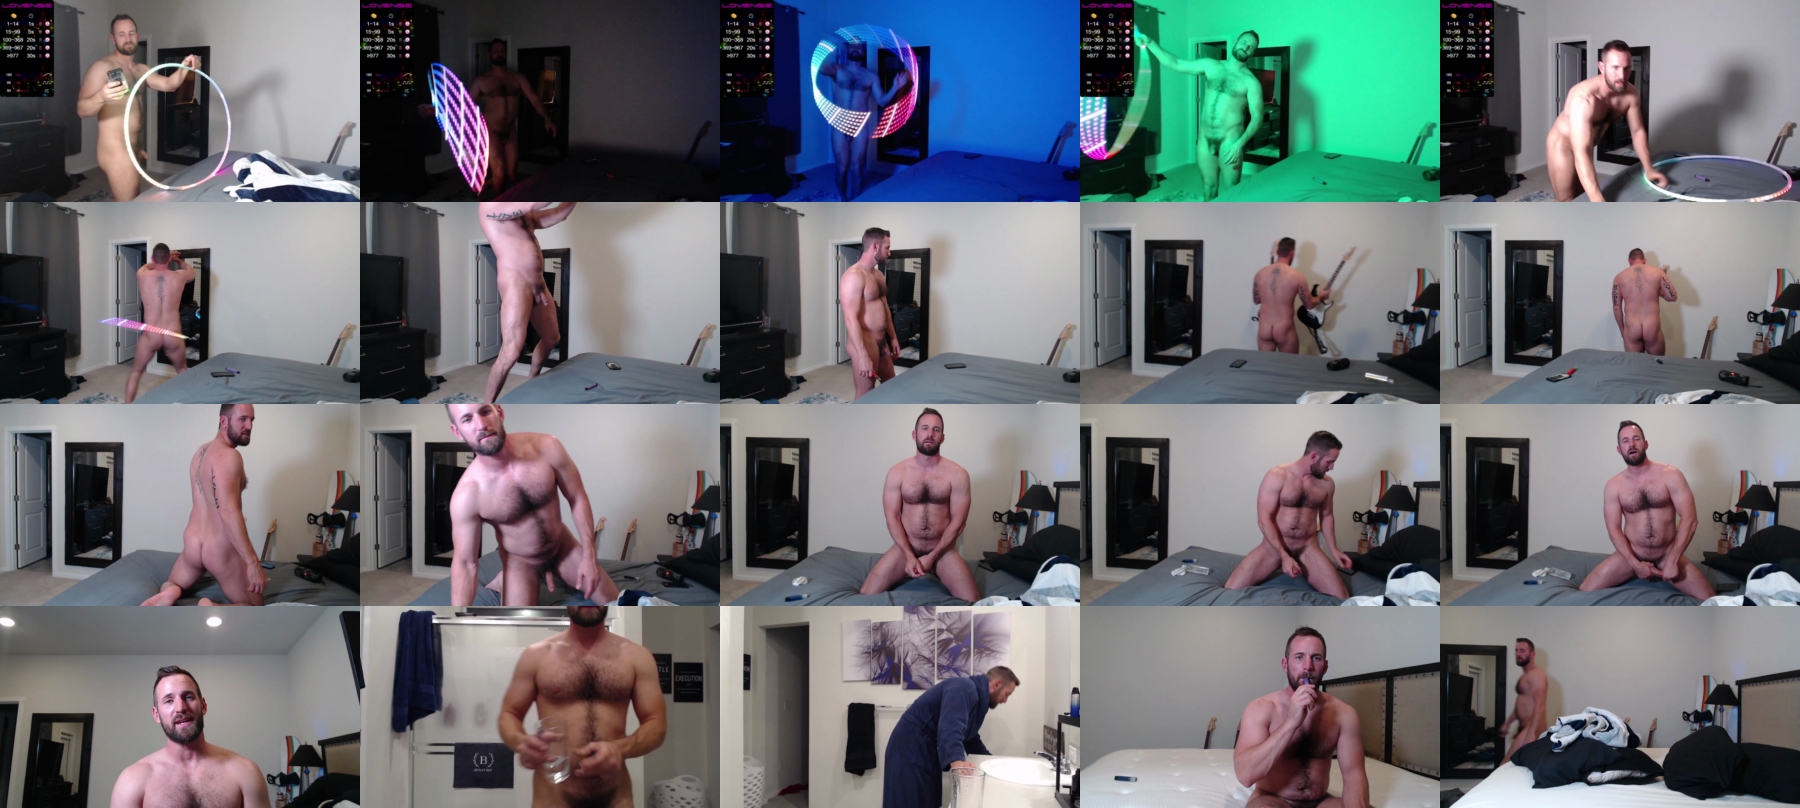 Benny_Bee  14-10-2021 Male Naked